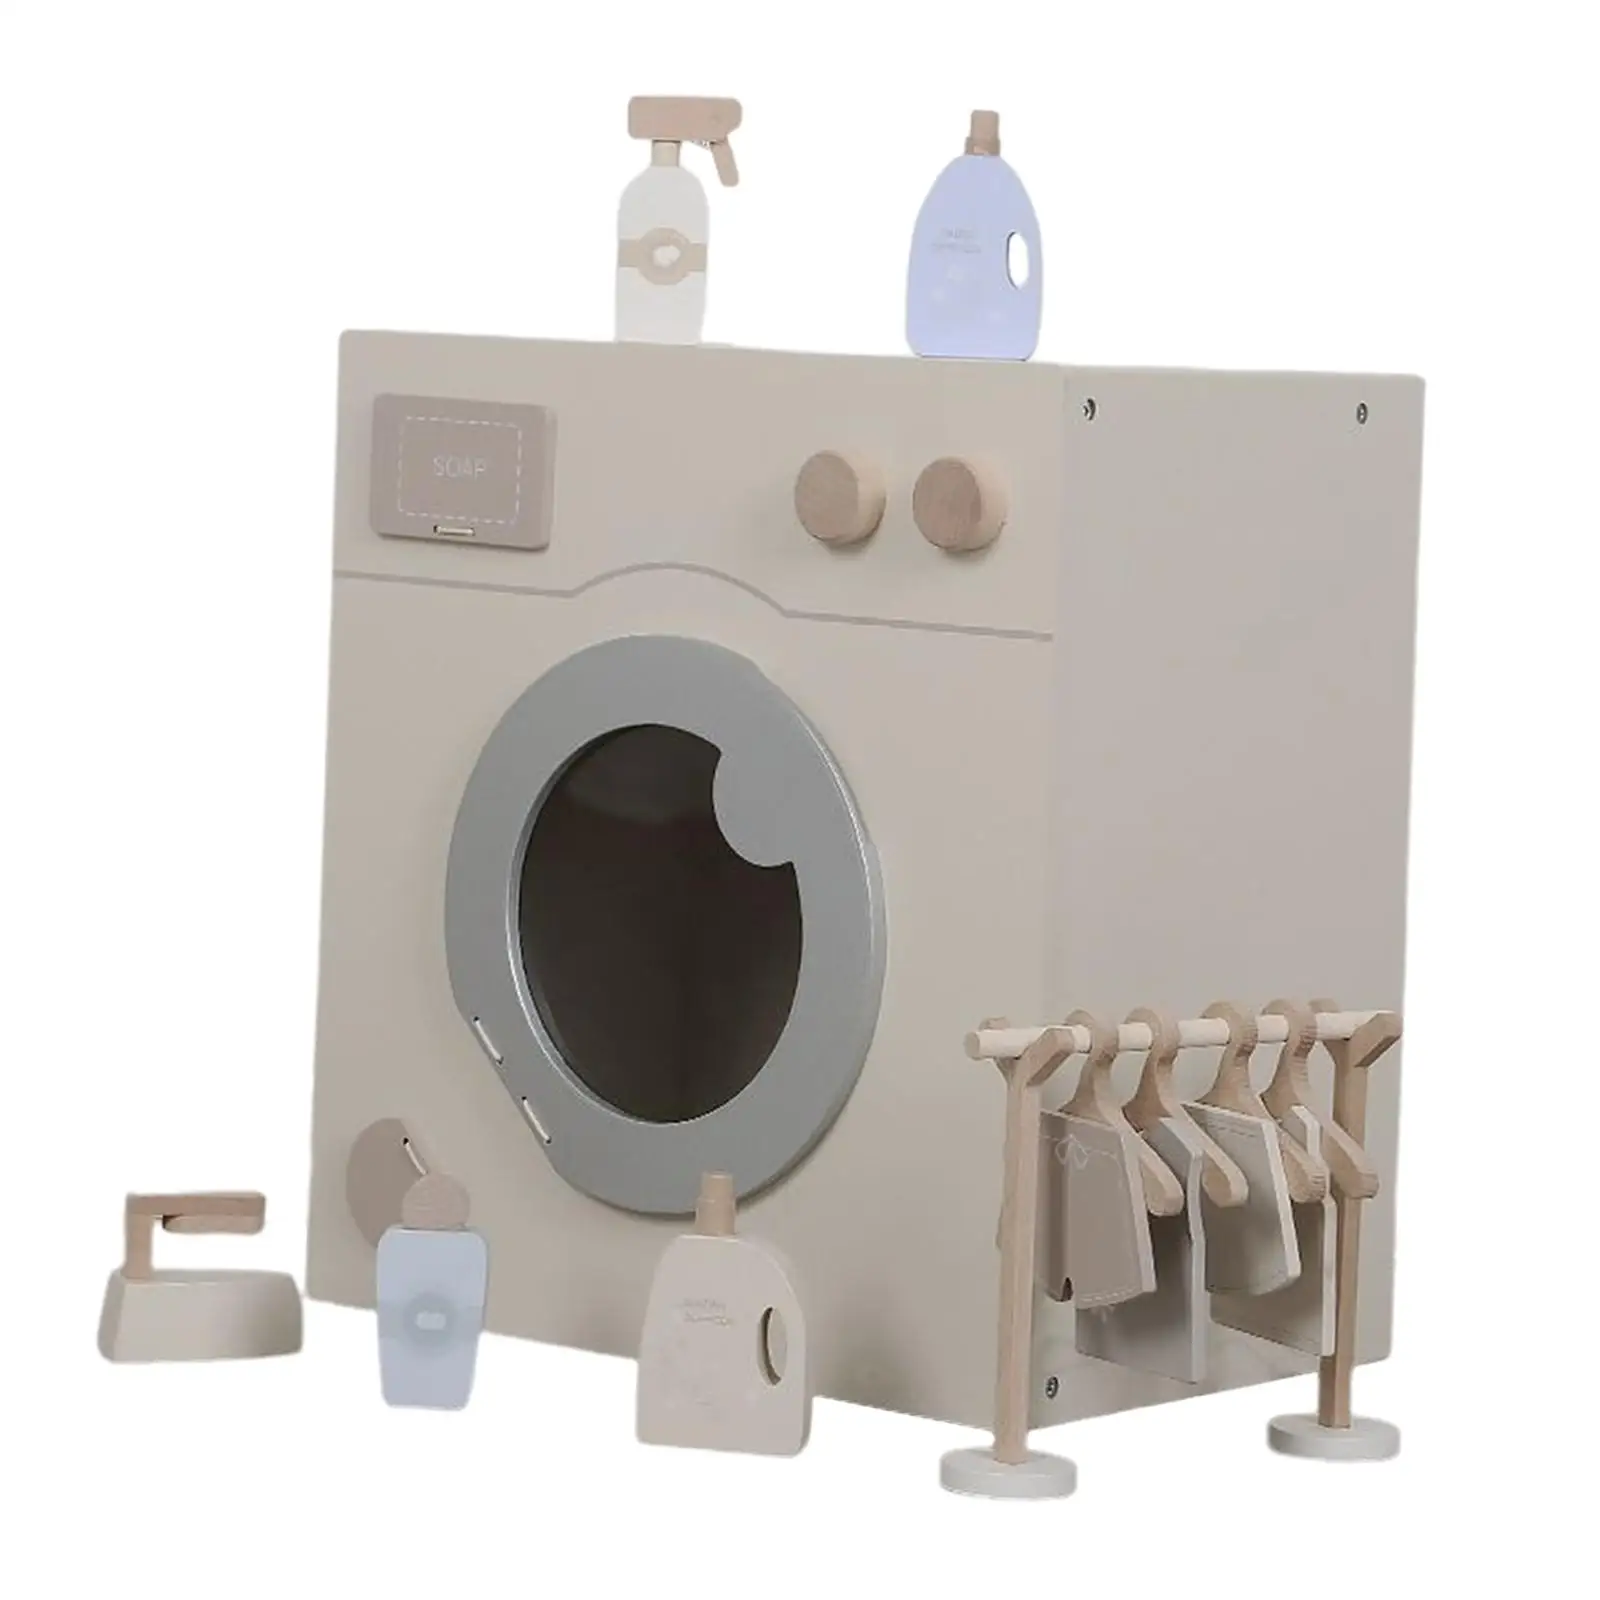 Wooden Washing Machine Set with Accessories Doll House Furniture Interactive Toy